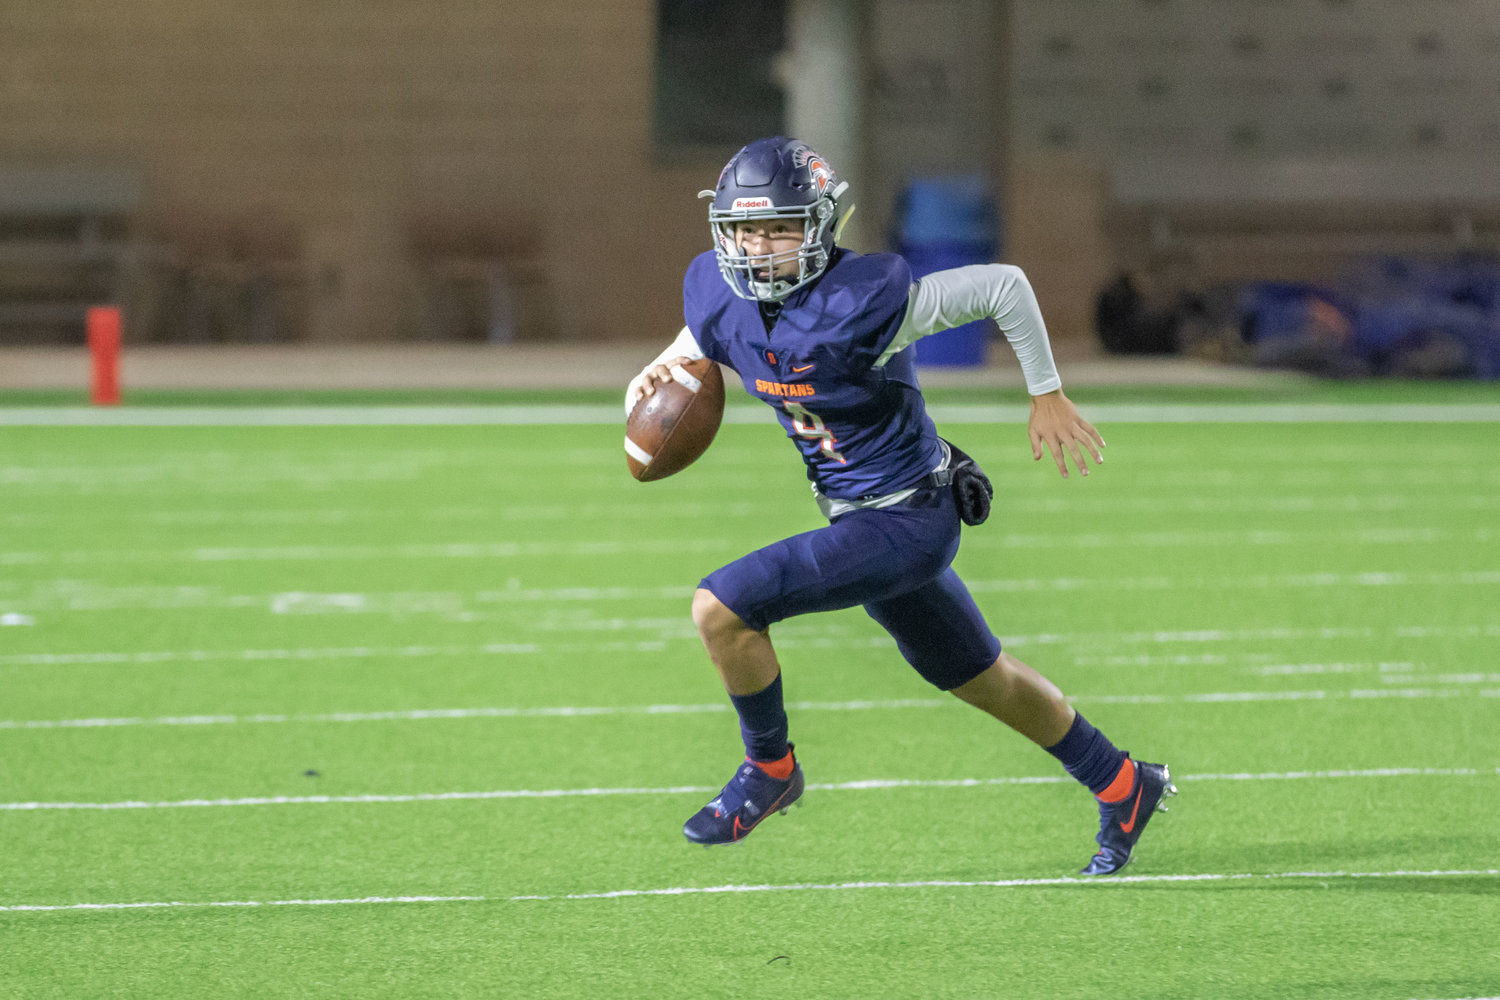 Seven Lakes senior quarterback Cristian Beltran scrambles for the Spartans during their win over Cinco Ranch on Dec. 4 at Legacy Stadium.